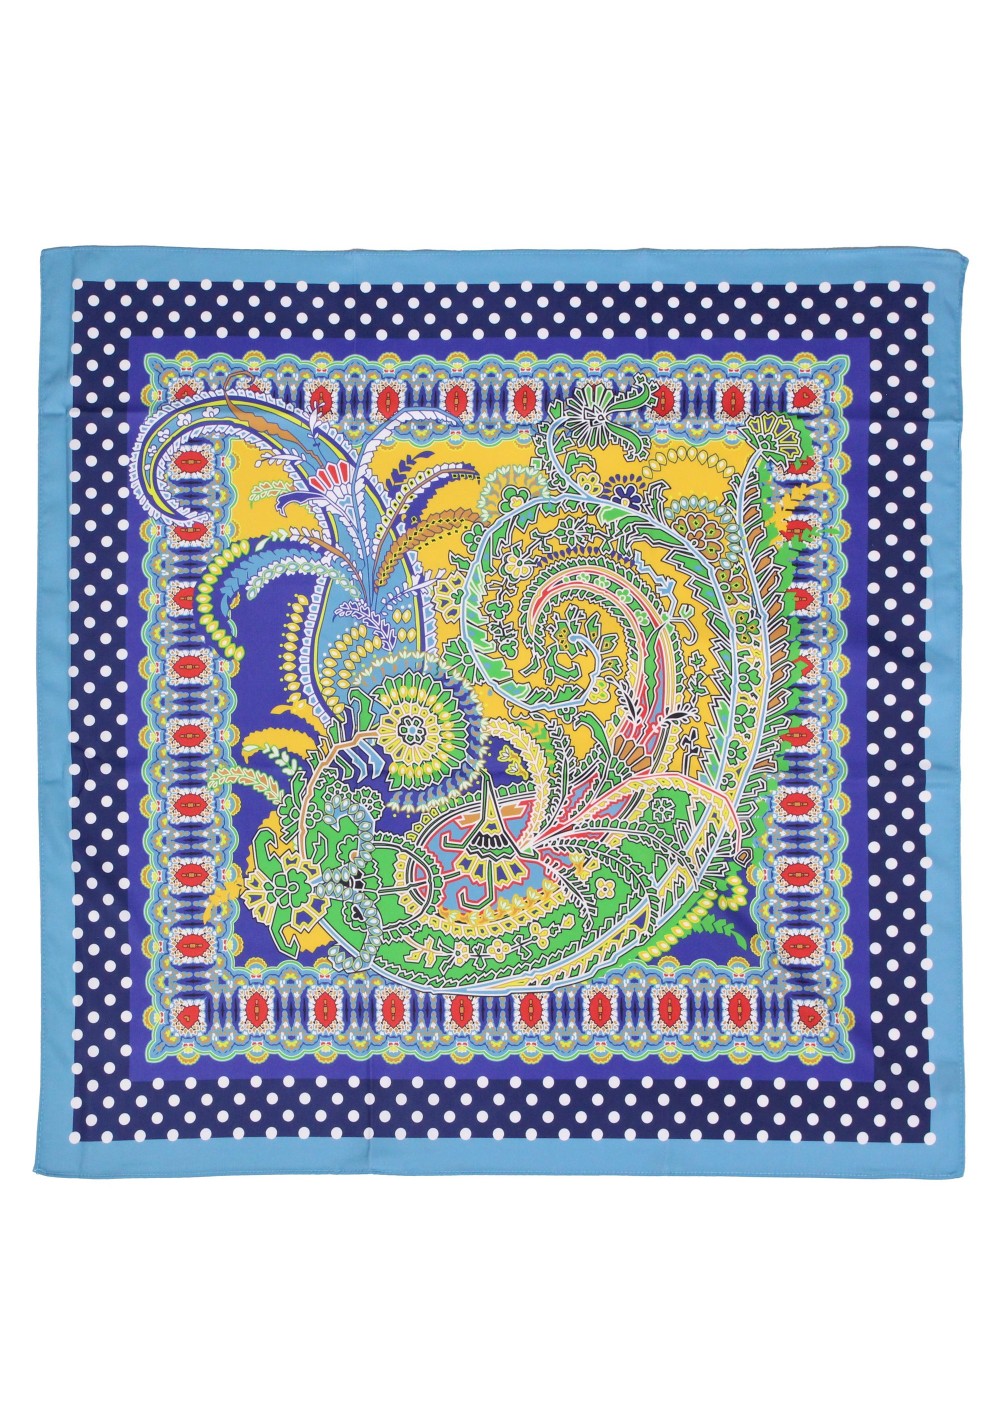 Paisley Scarf in Navy, Yellow, and Green